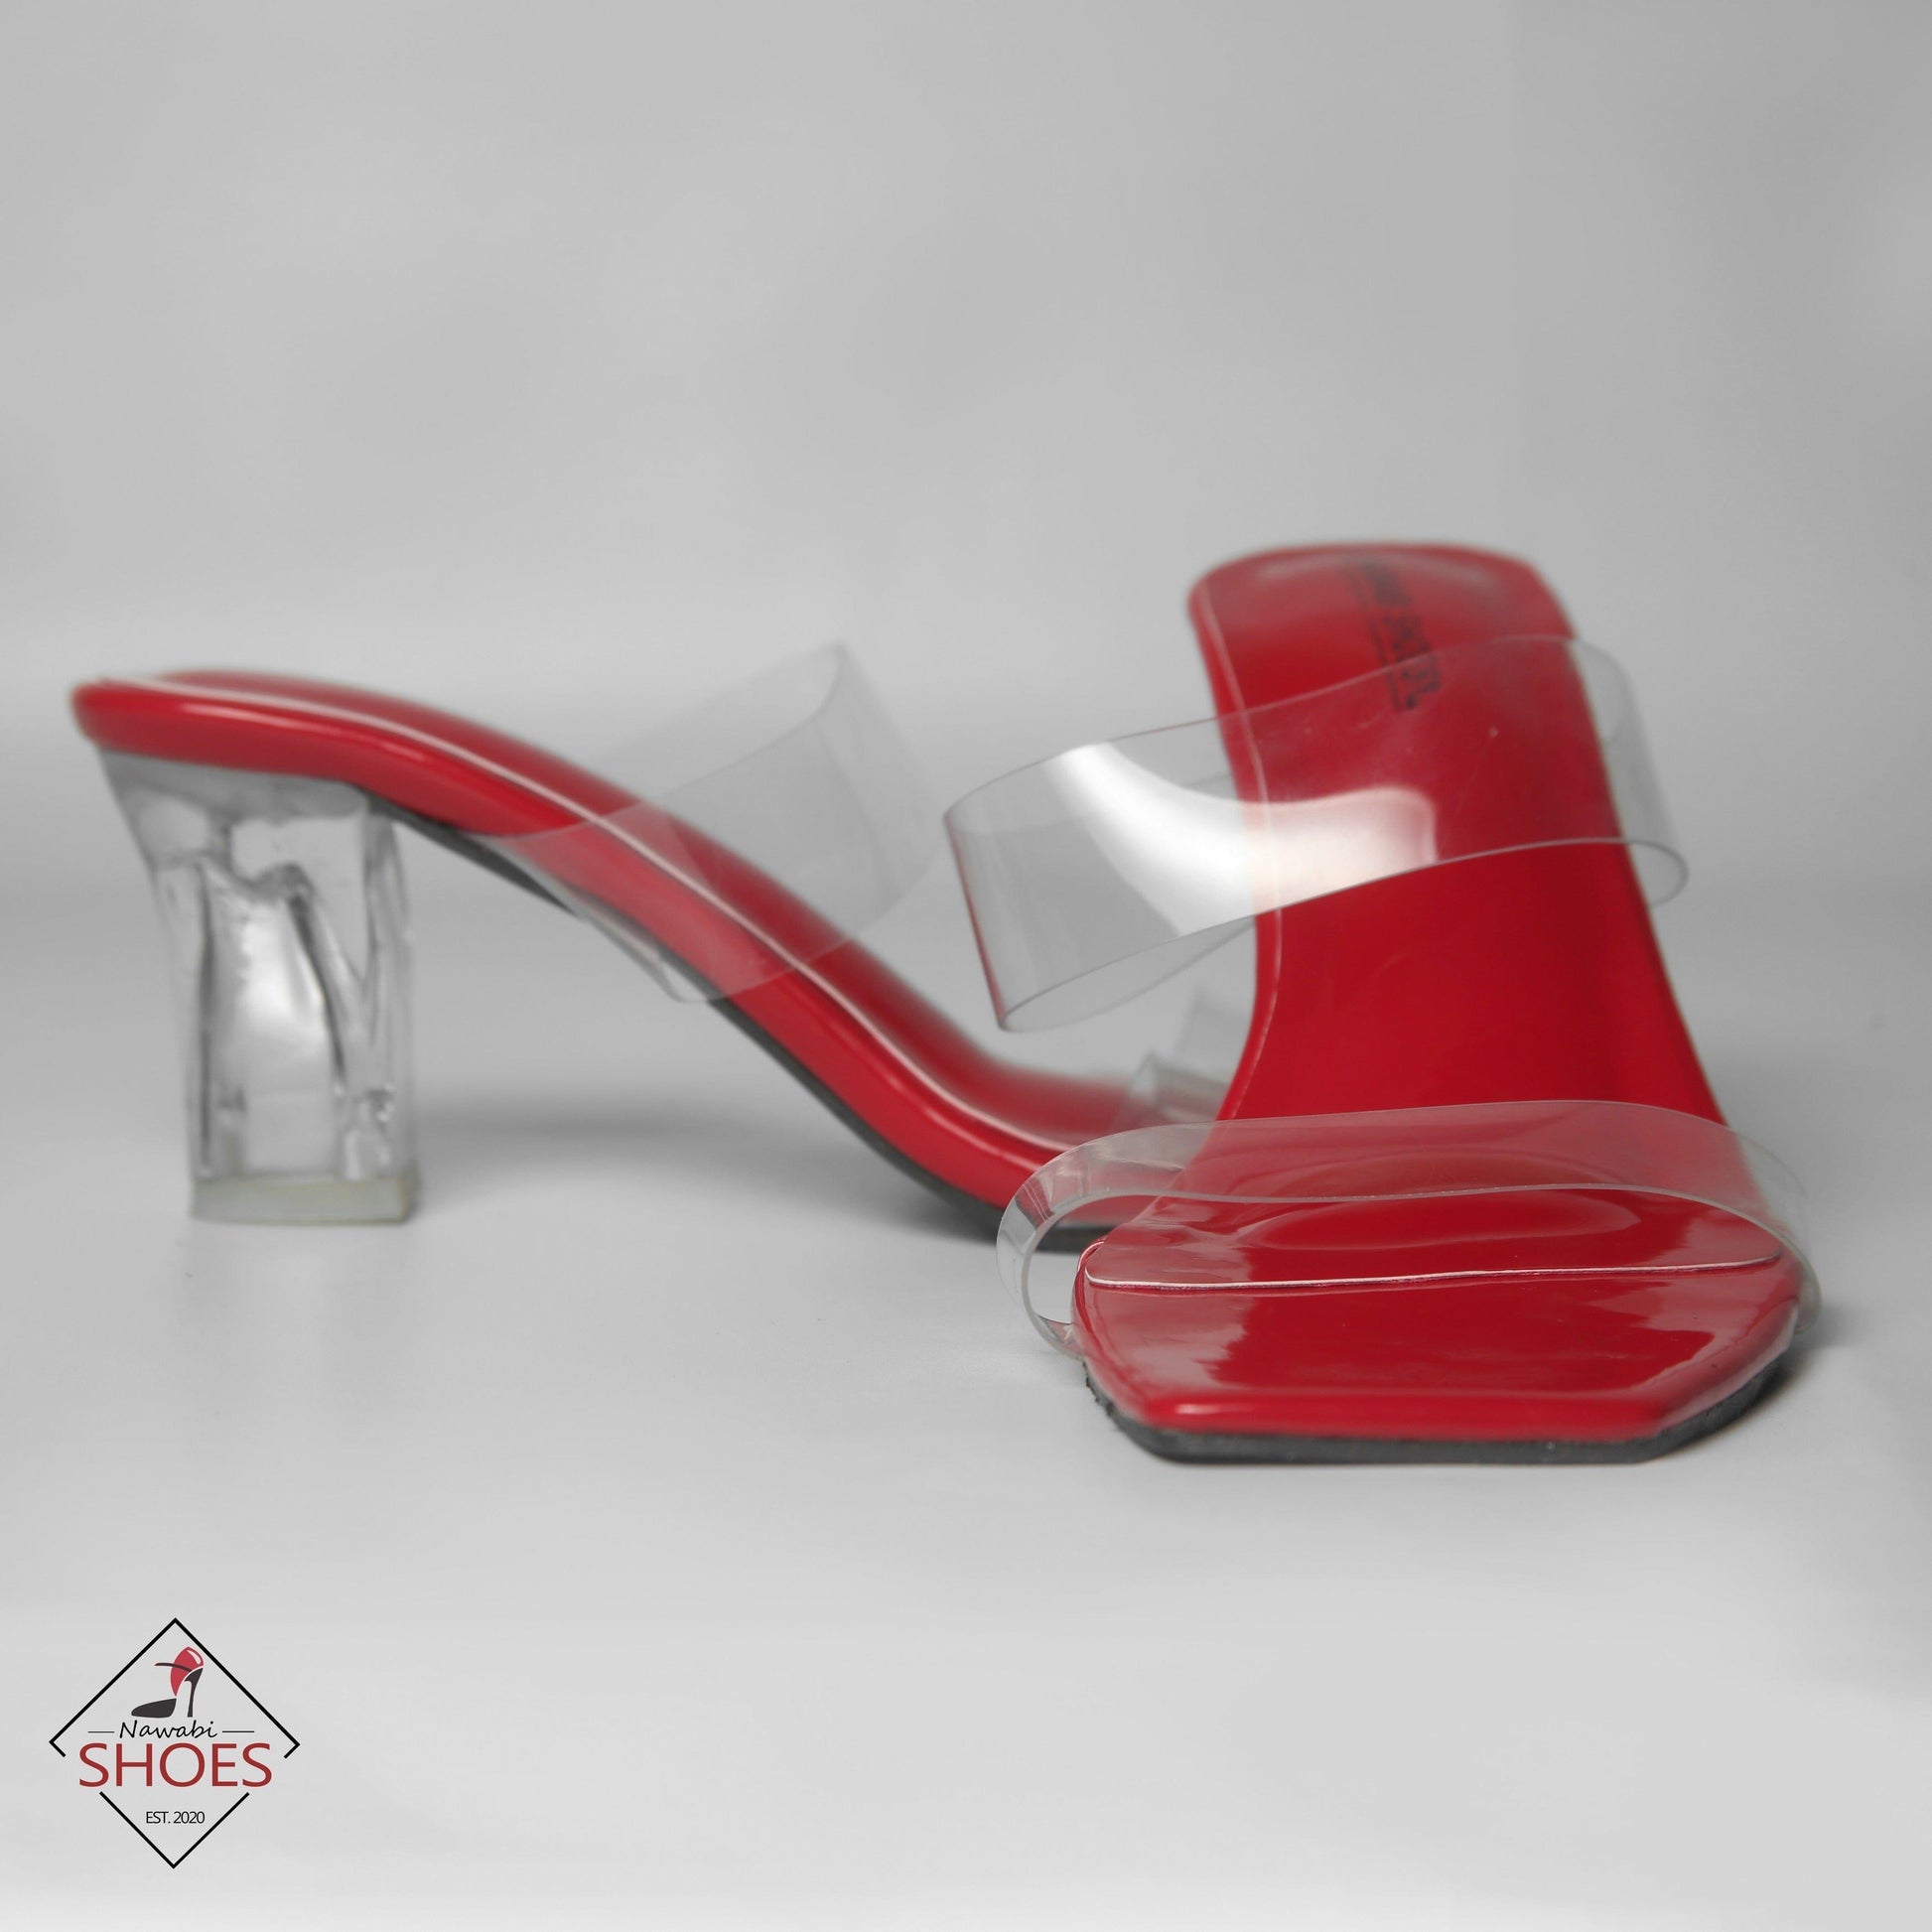 Nawabi Shoes BD Shoes 35 / red Find Your Perfect Pair of Clear Heel Shoes